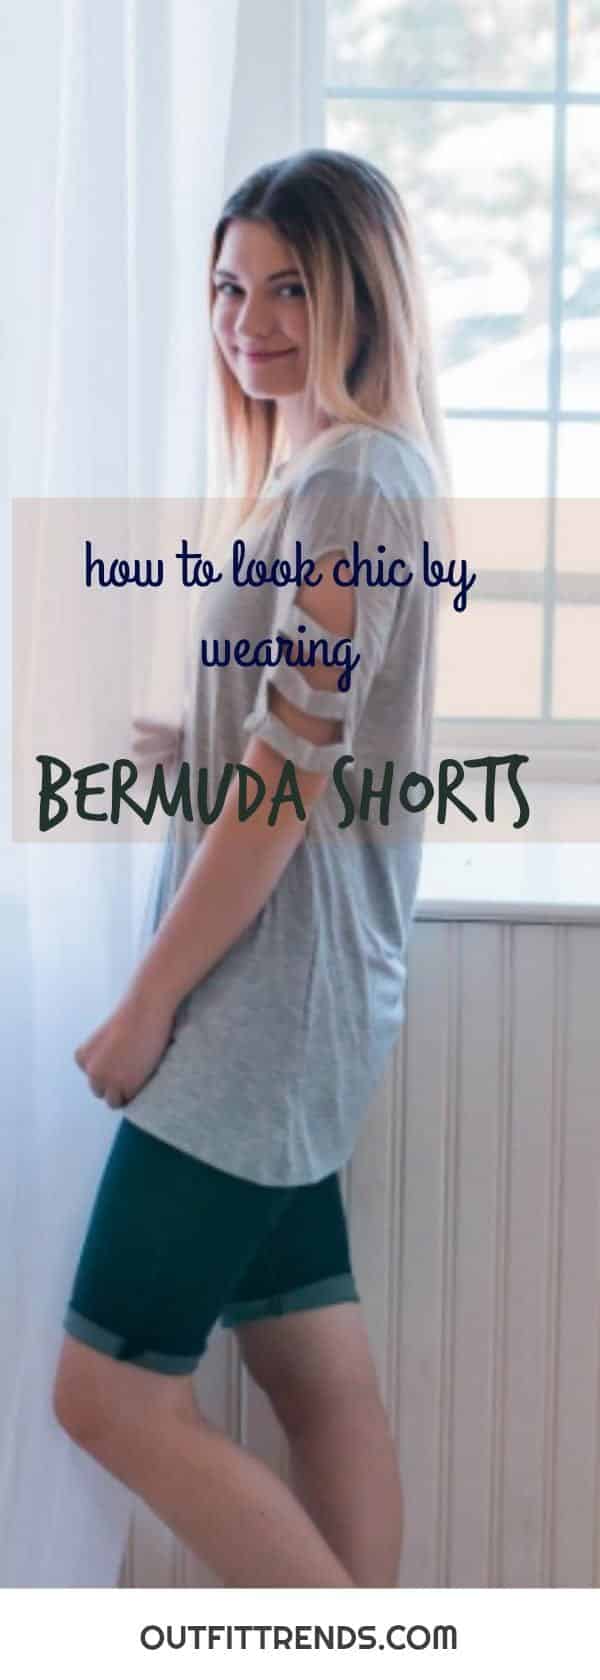 20 Cute Bermuda Short Outfits for Girls for Chic look